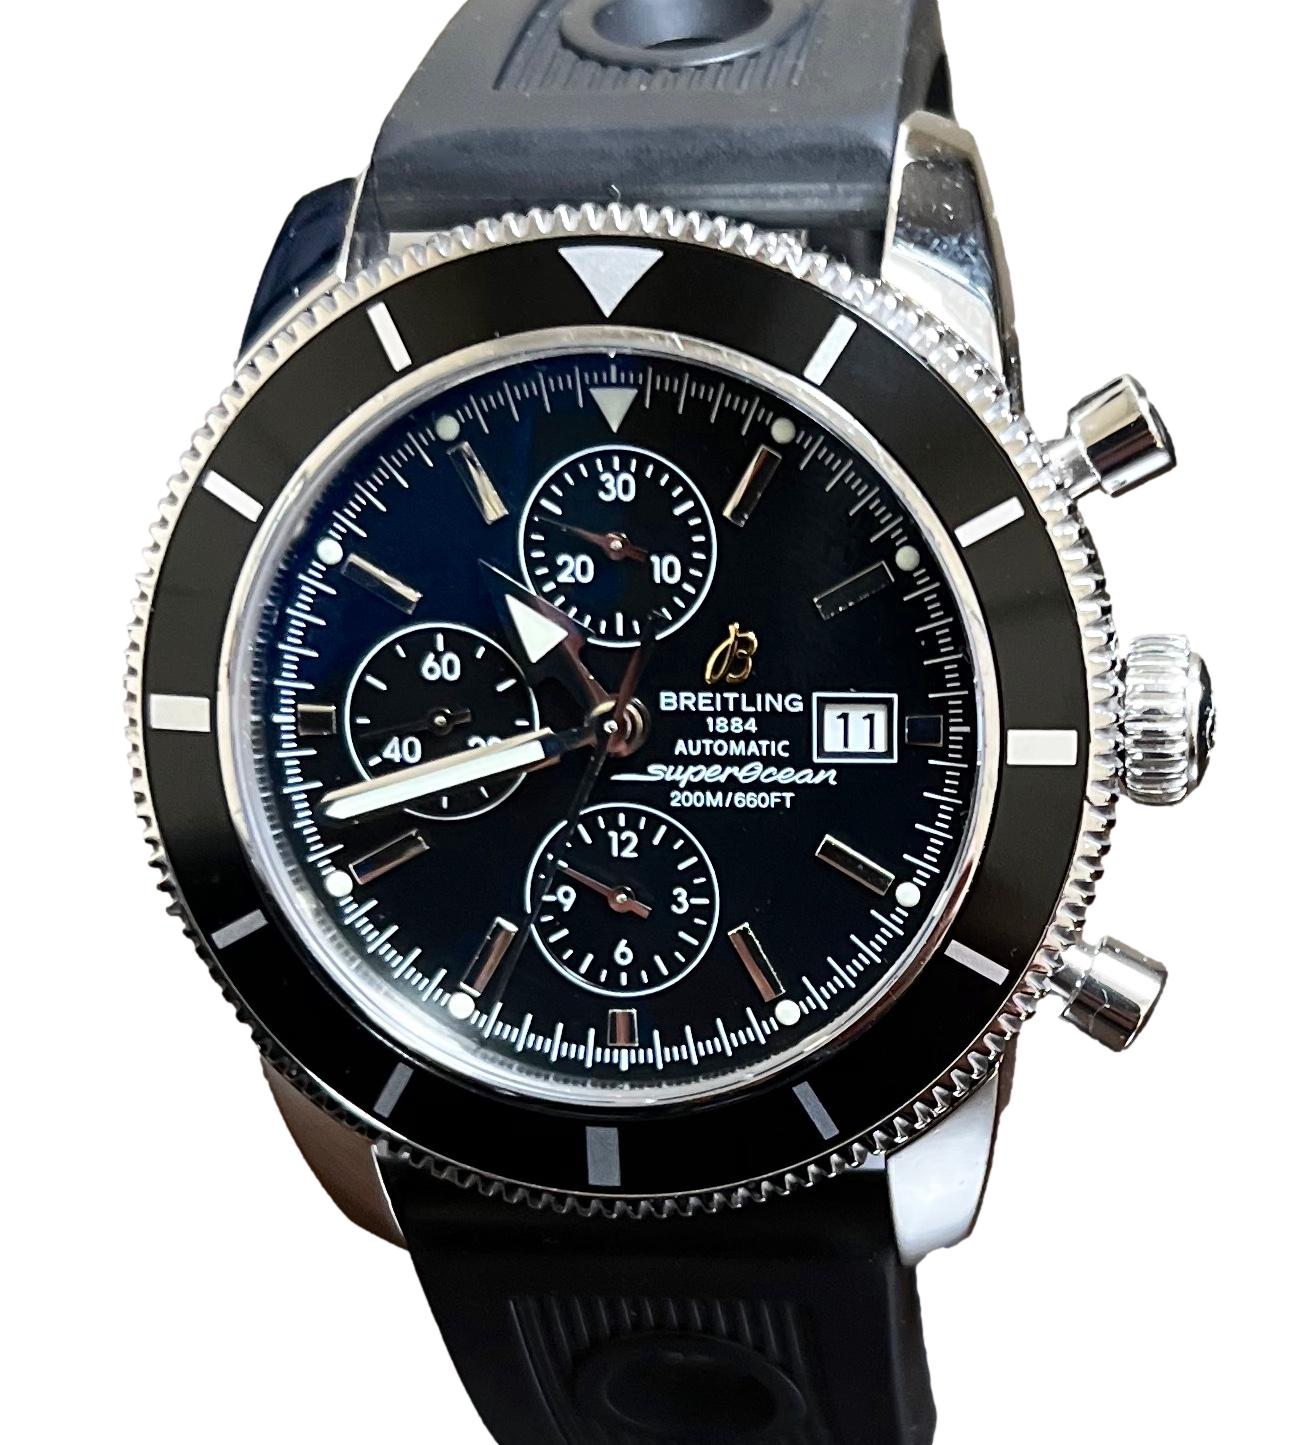 Breitling Super Ocean Heritage 44 A13320 Chronograph Black Dial Rubber Watch\